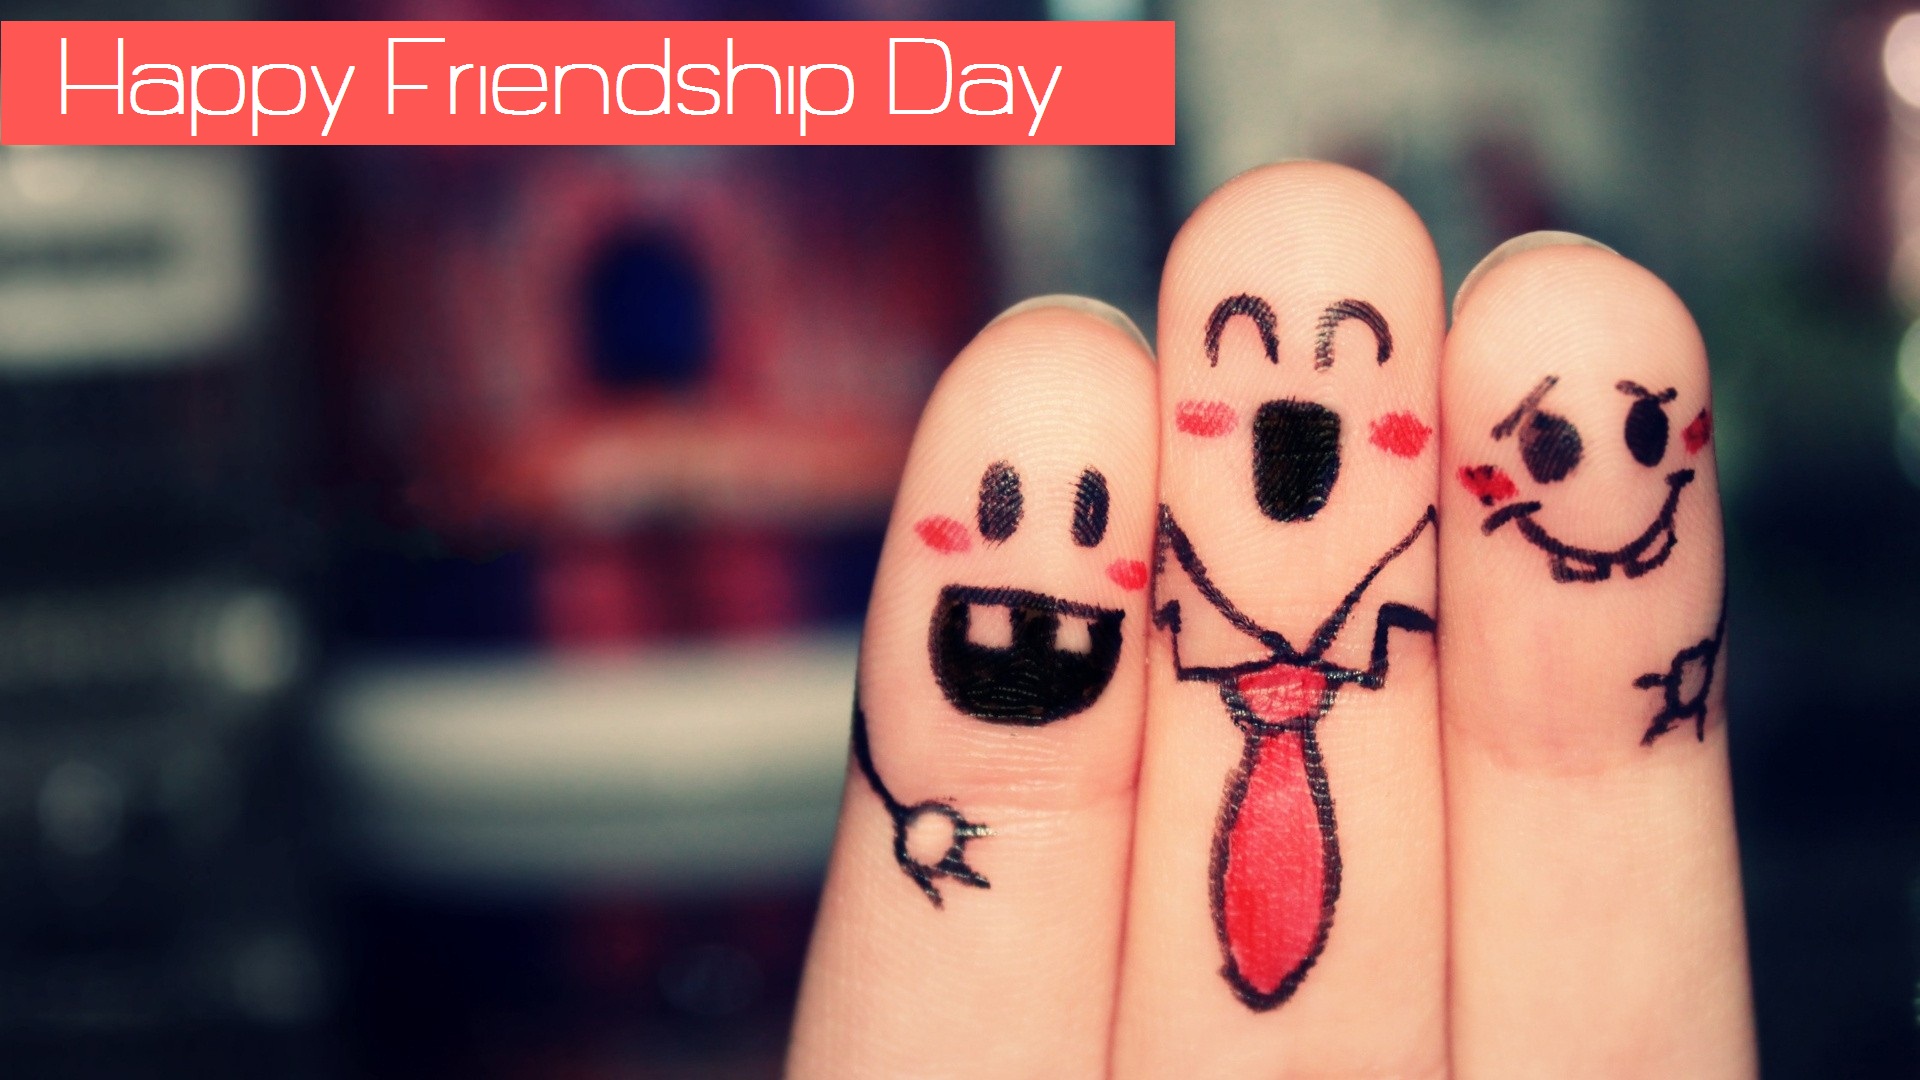 Happy Friendship Day 2016 fb cover Images (14)